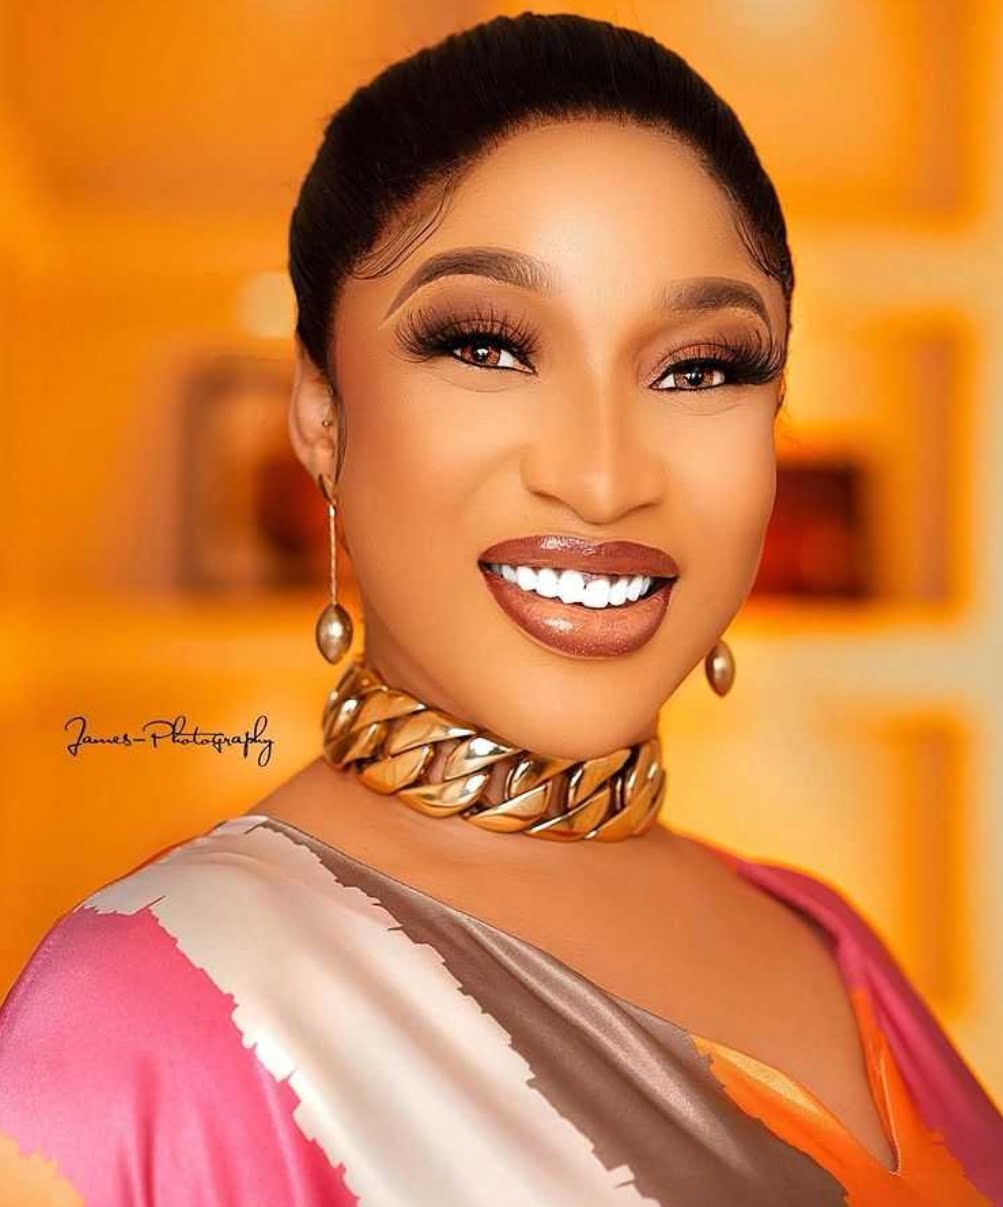 Tonto Dikeh expresses interest at exposing celebrity’s fake life, rejects advise to write on Jim Iyke